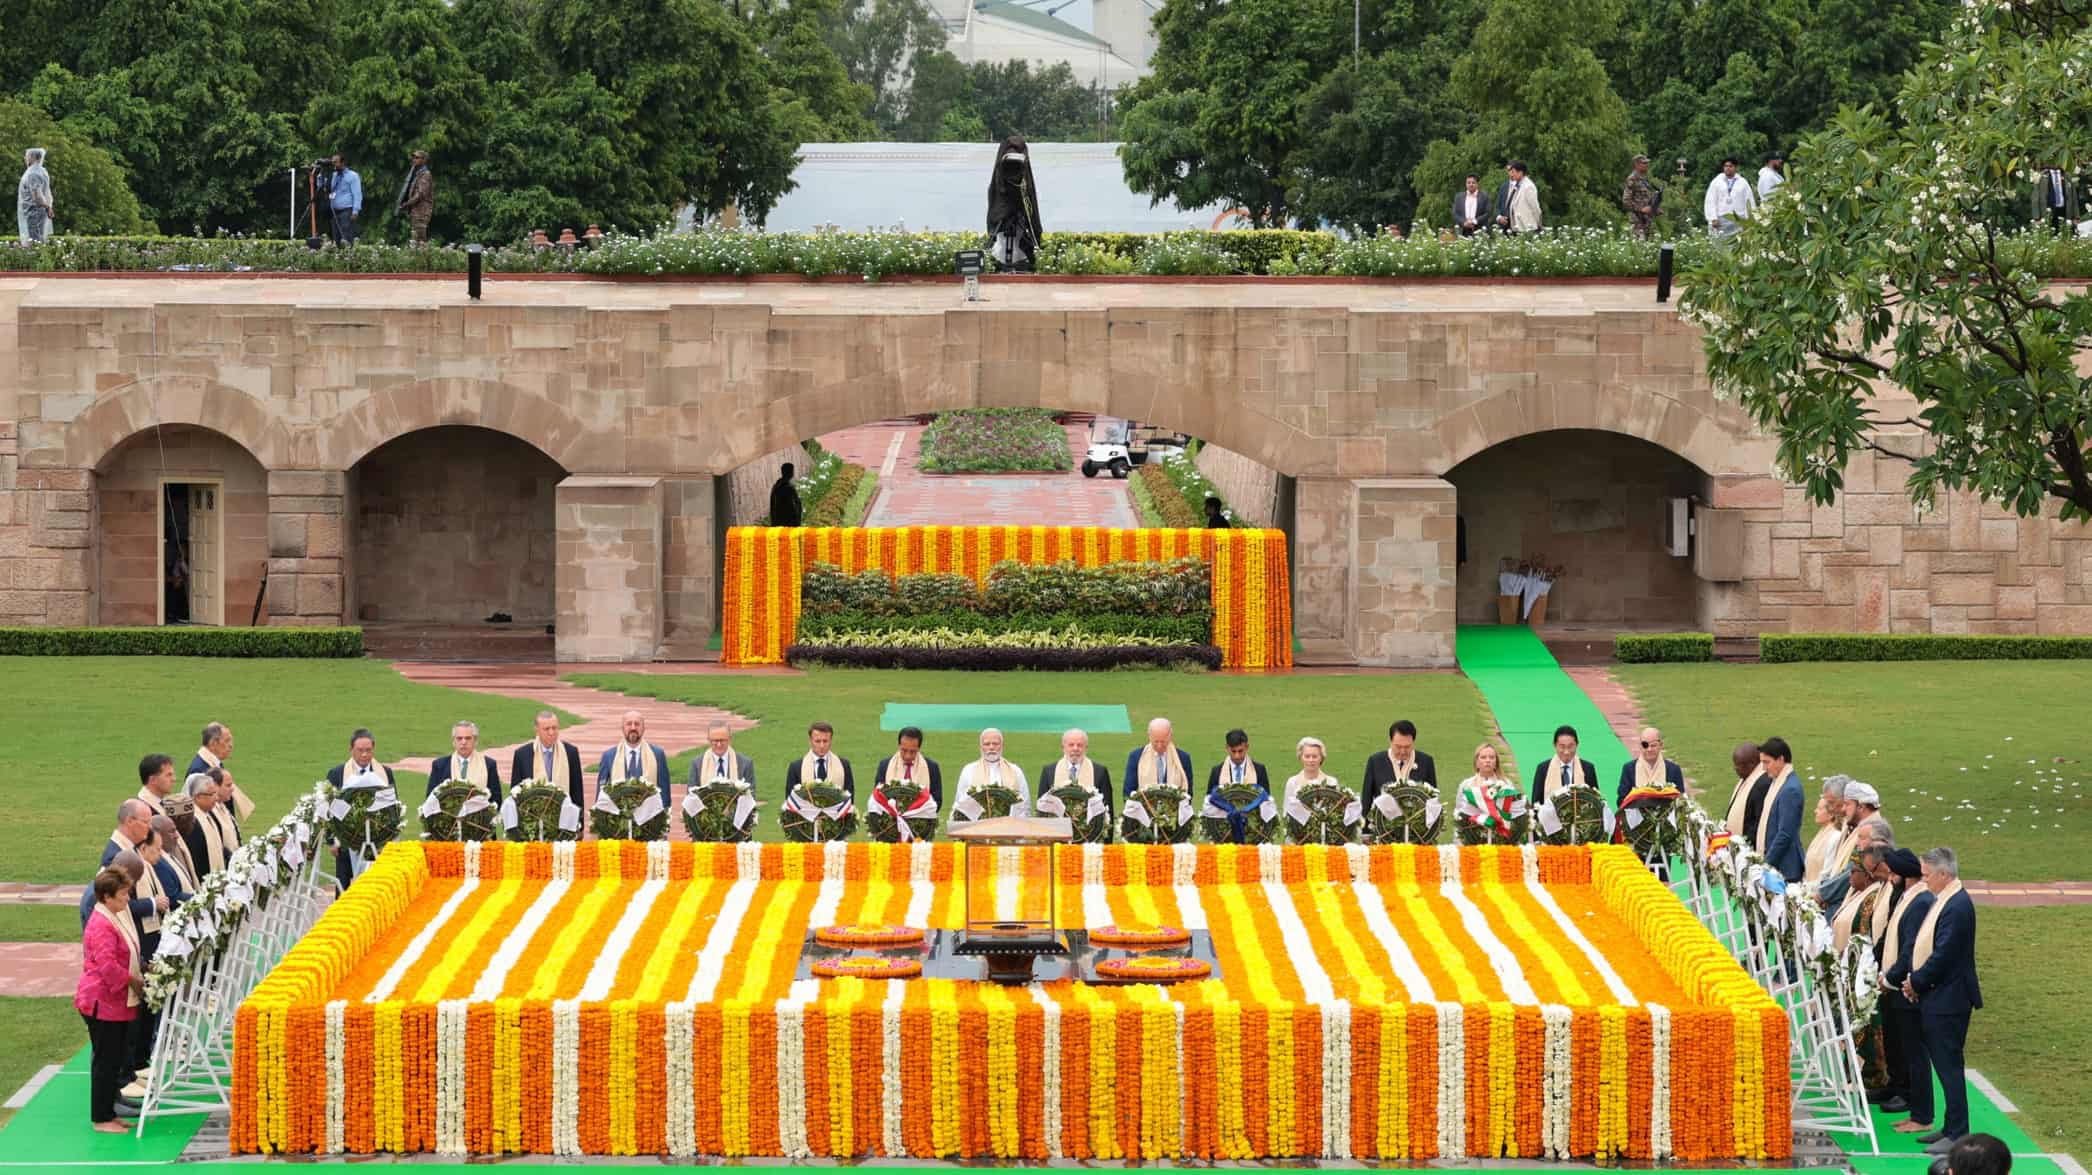 India's Prime Minister Narendra Modi (C) along with world leaders pays respect at the Mahatma Gandhi memorial at Raj Ghat on the sidelines of the G20 summit in New Delhi on September 10, 2023. (Photo by PIB / AFP) / RESTRICTED TO EDITORIAL USE (Photo by -/PIB/AFP via Getty Images)